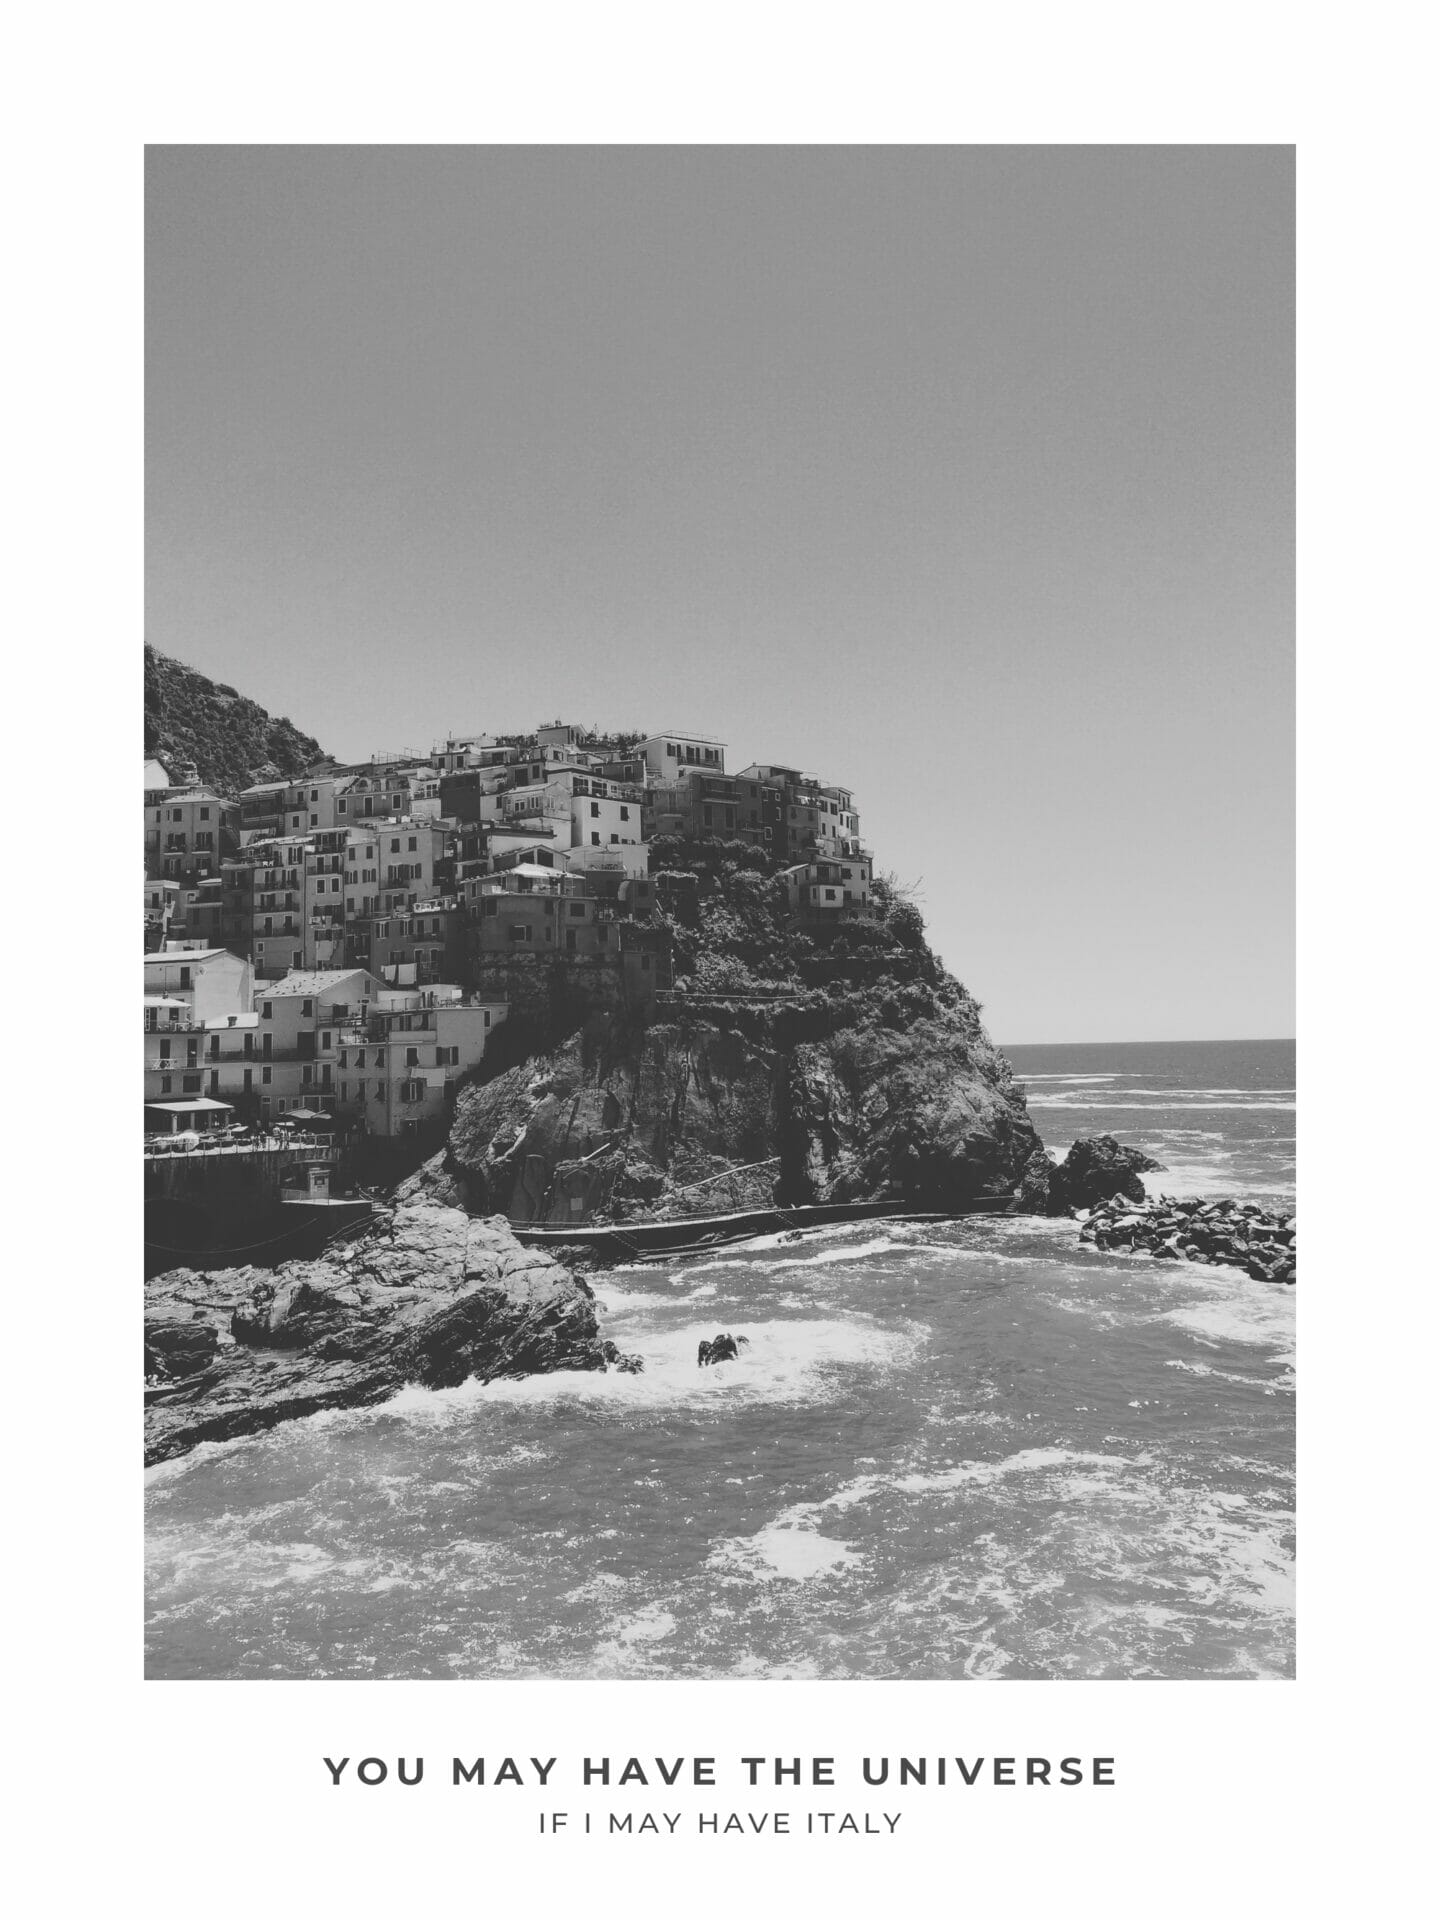 Poster of city of Cinque Terre by the sea